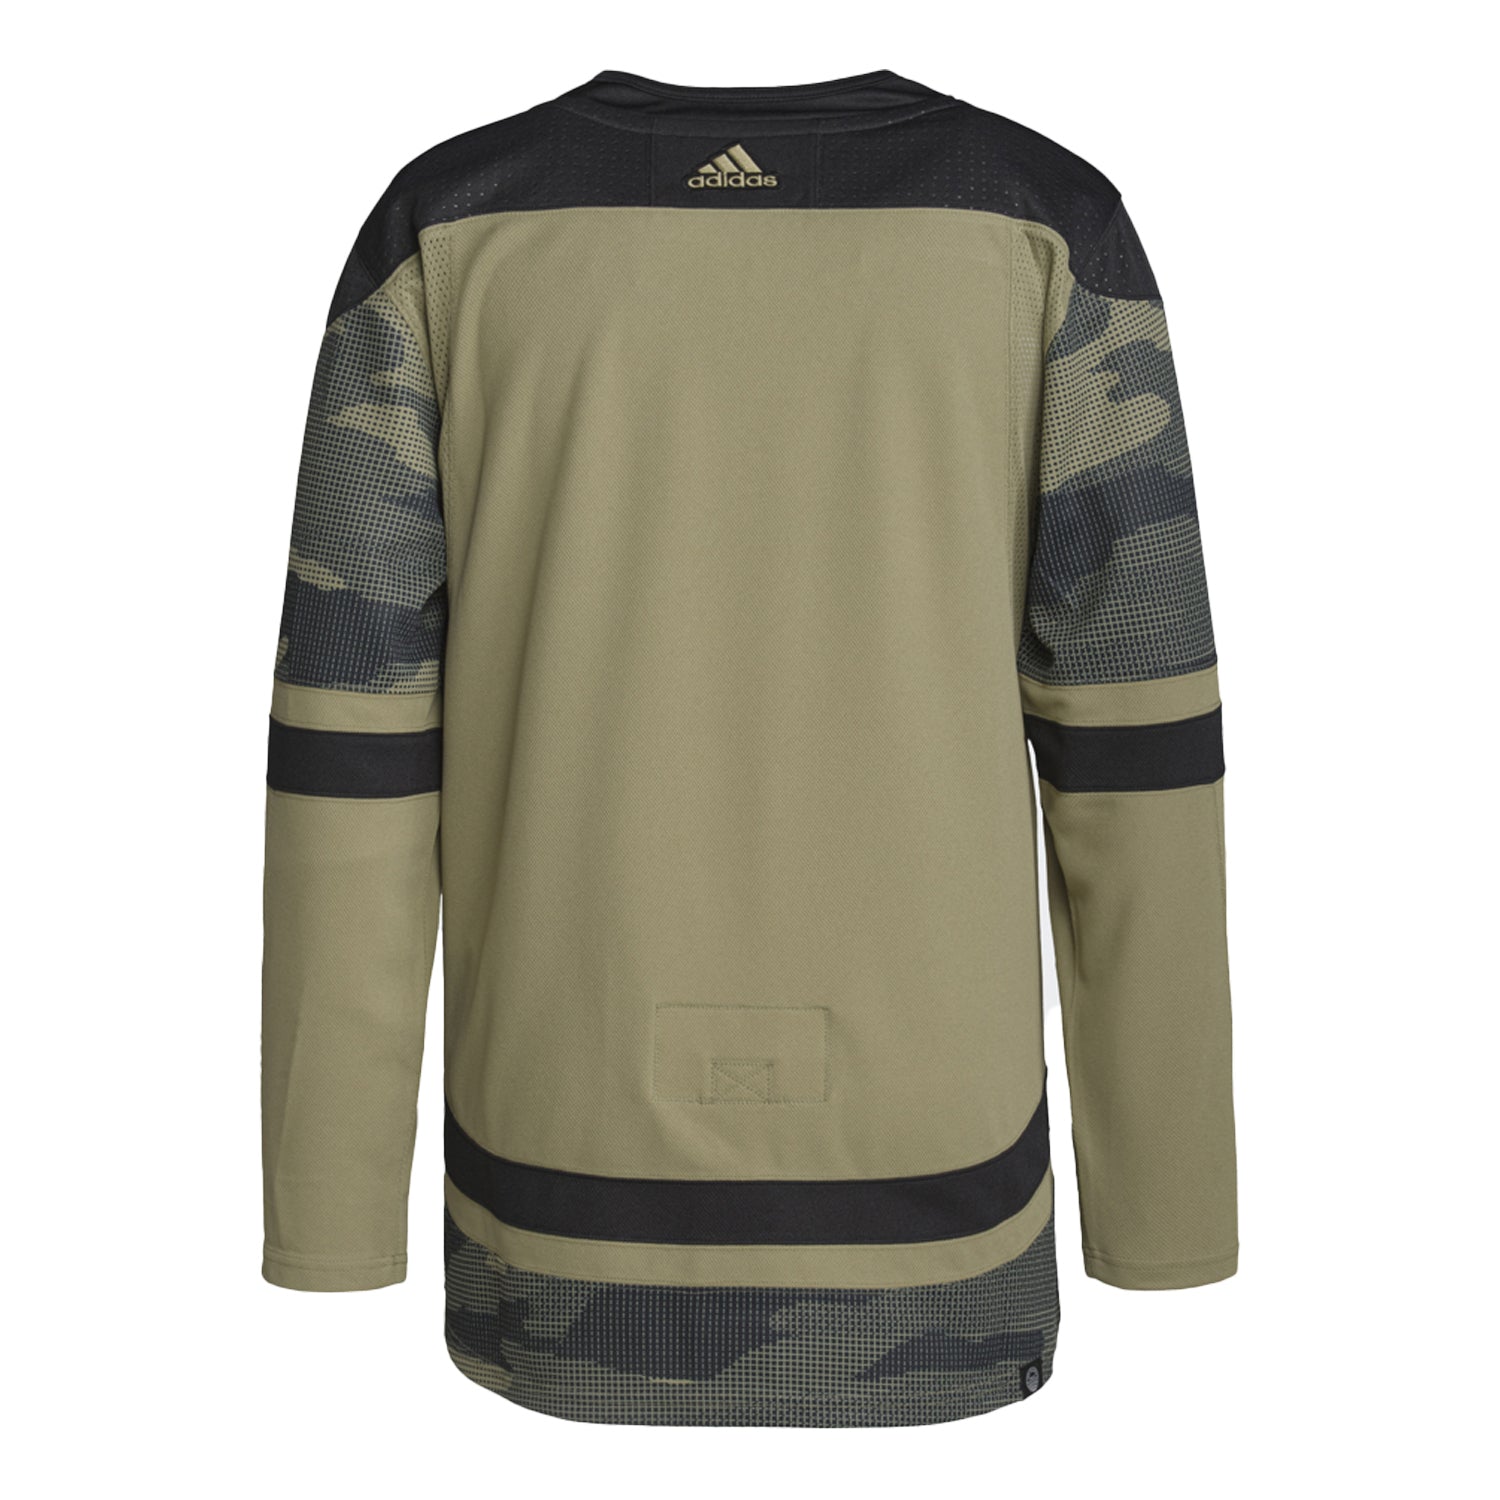 New York Rangers Change Up Their Veterans Day Warmup Jersey